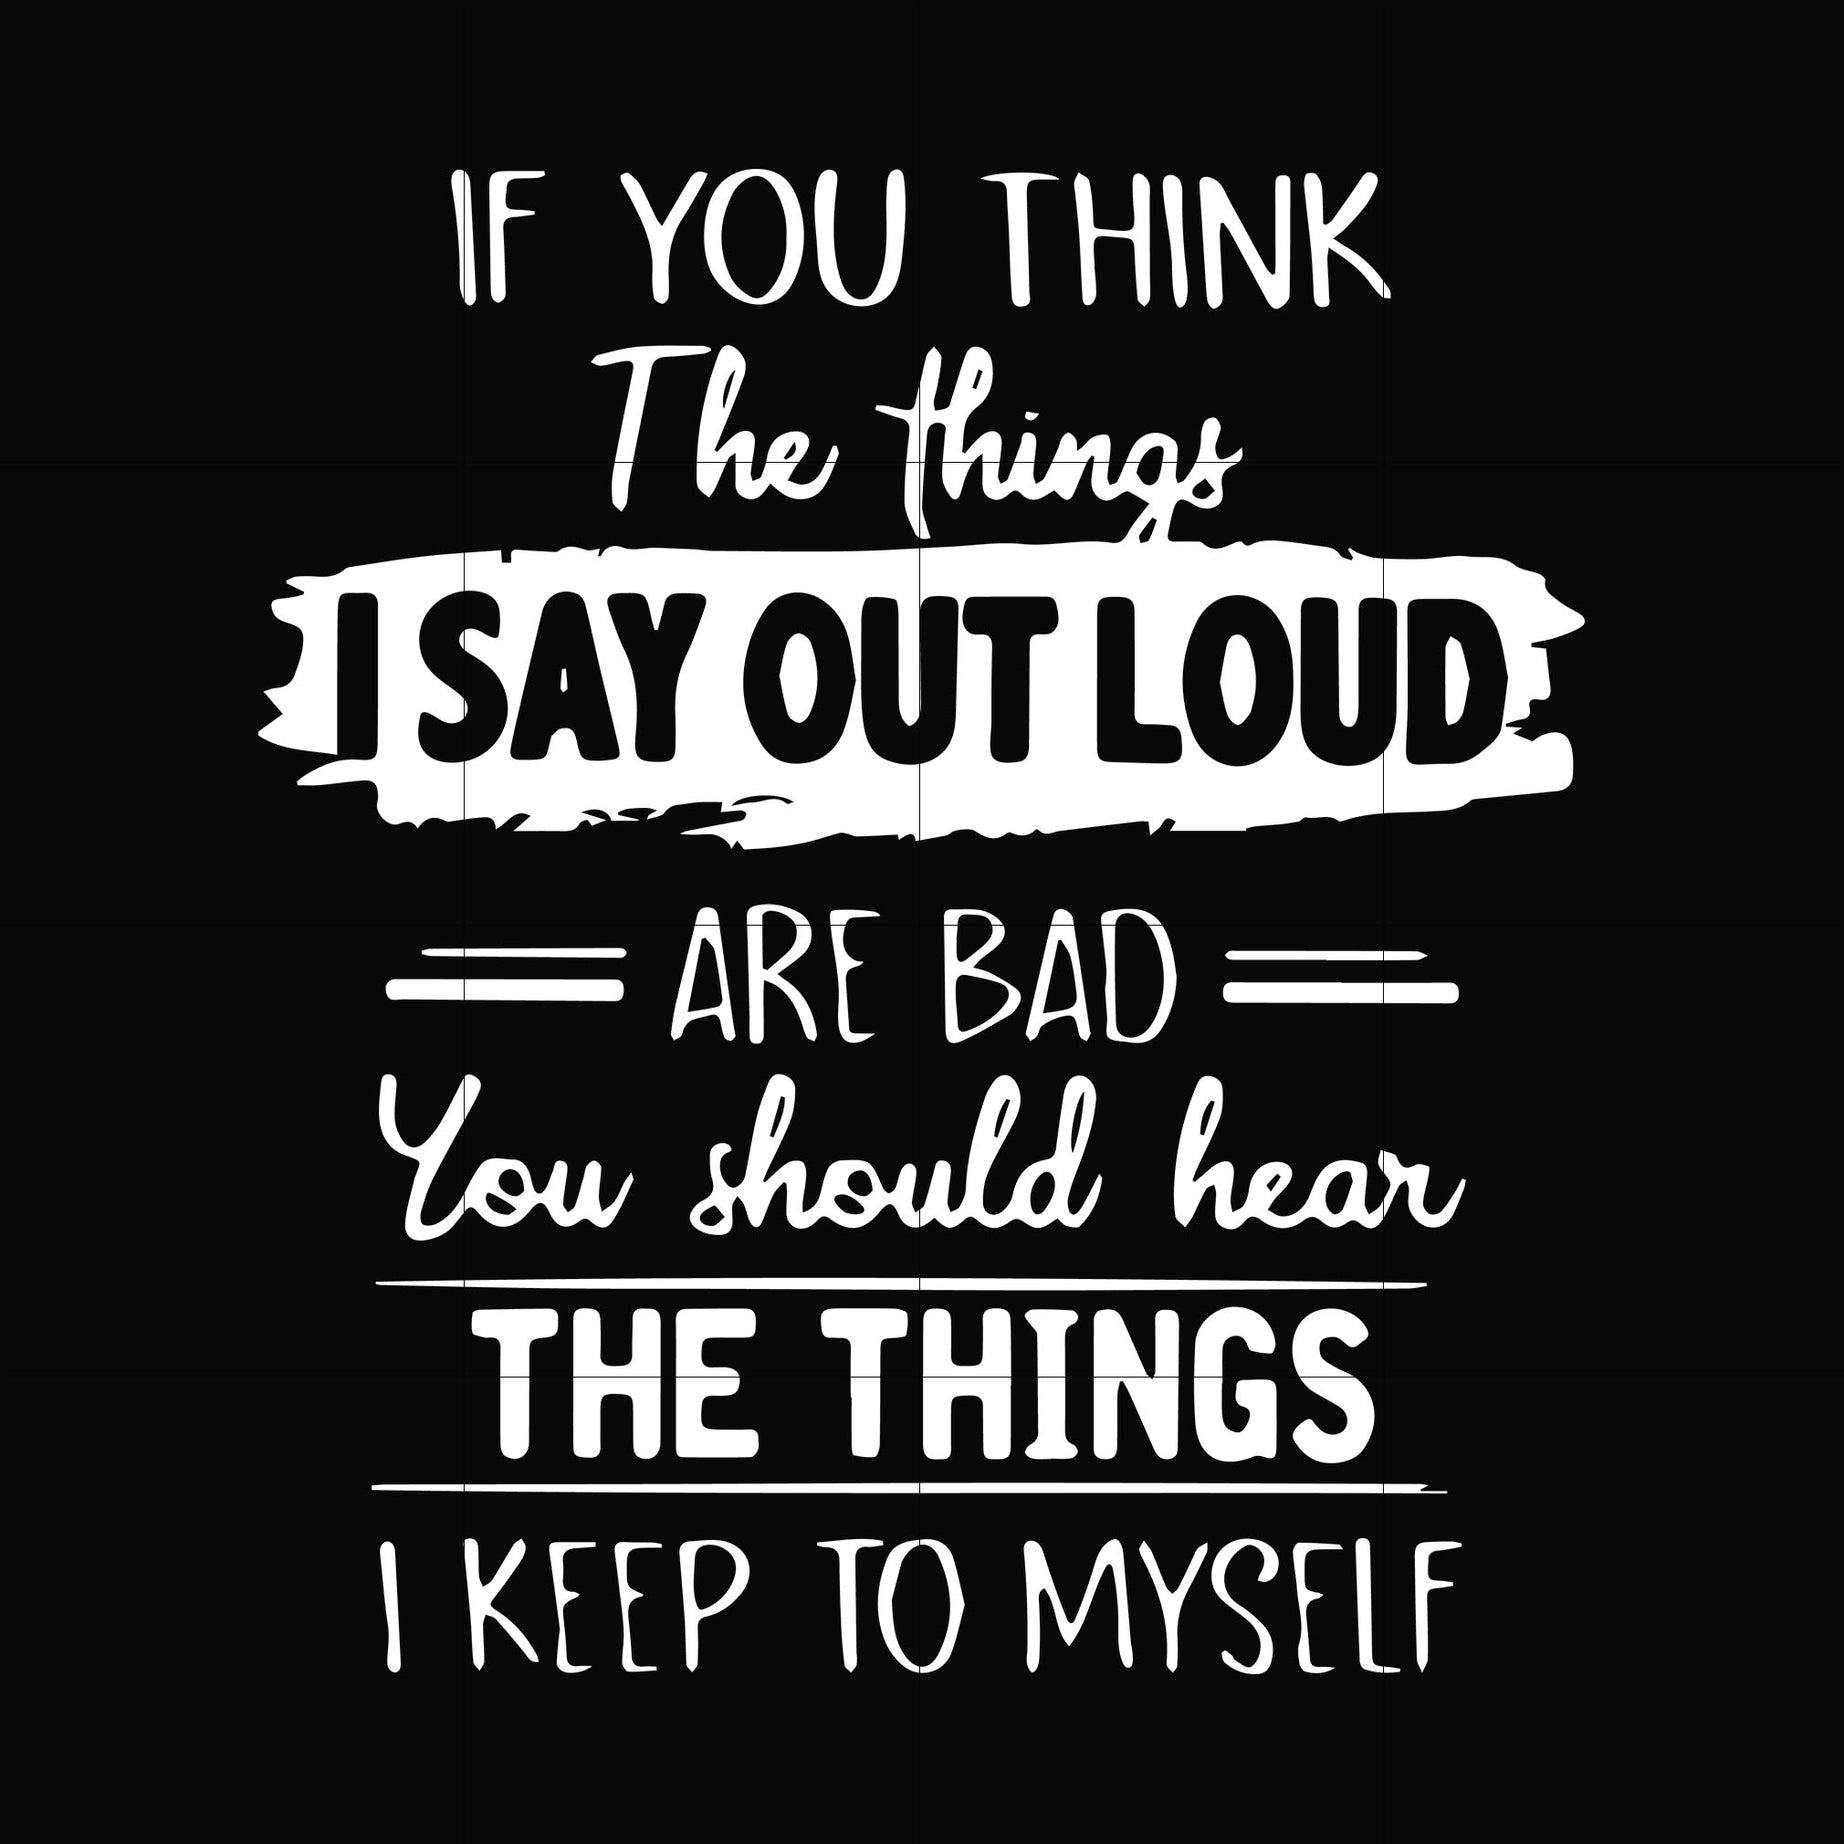 If you think the things I say out loud are bad you should hear the things I keep to myselfsvg, png, dxf, eps digital file NCRM13072022